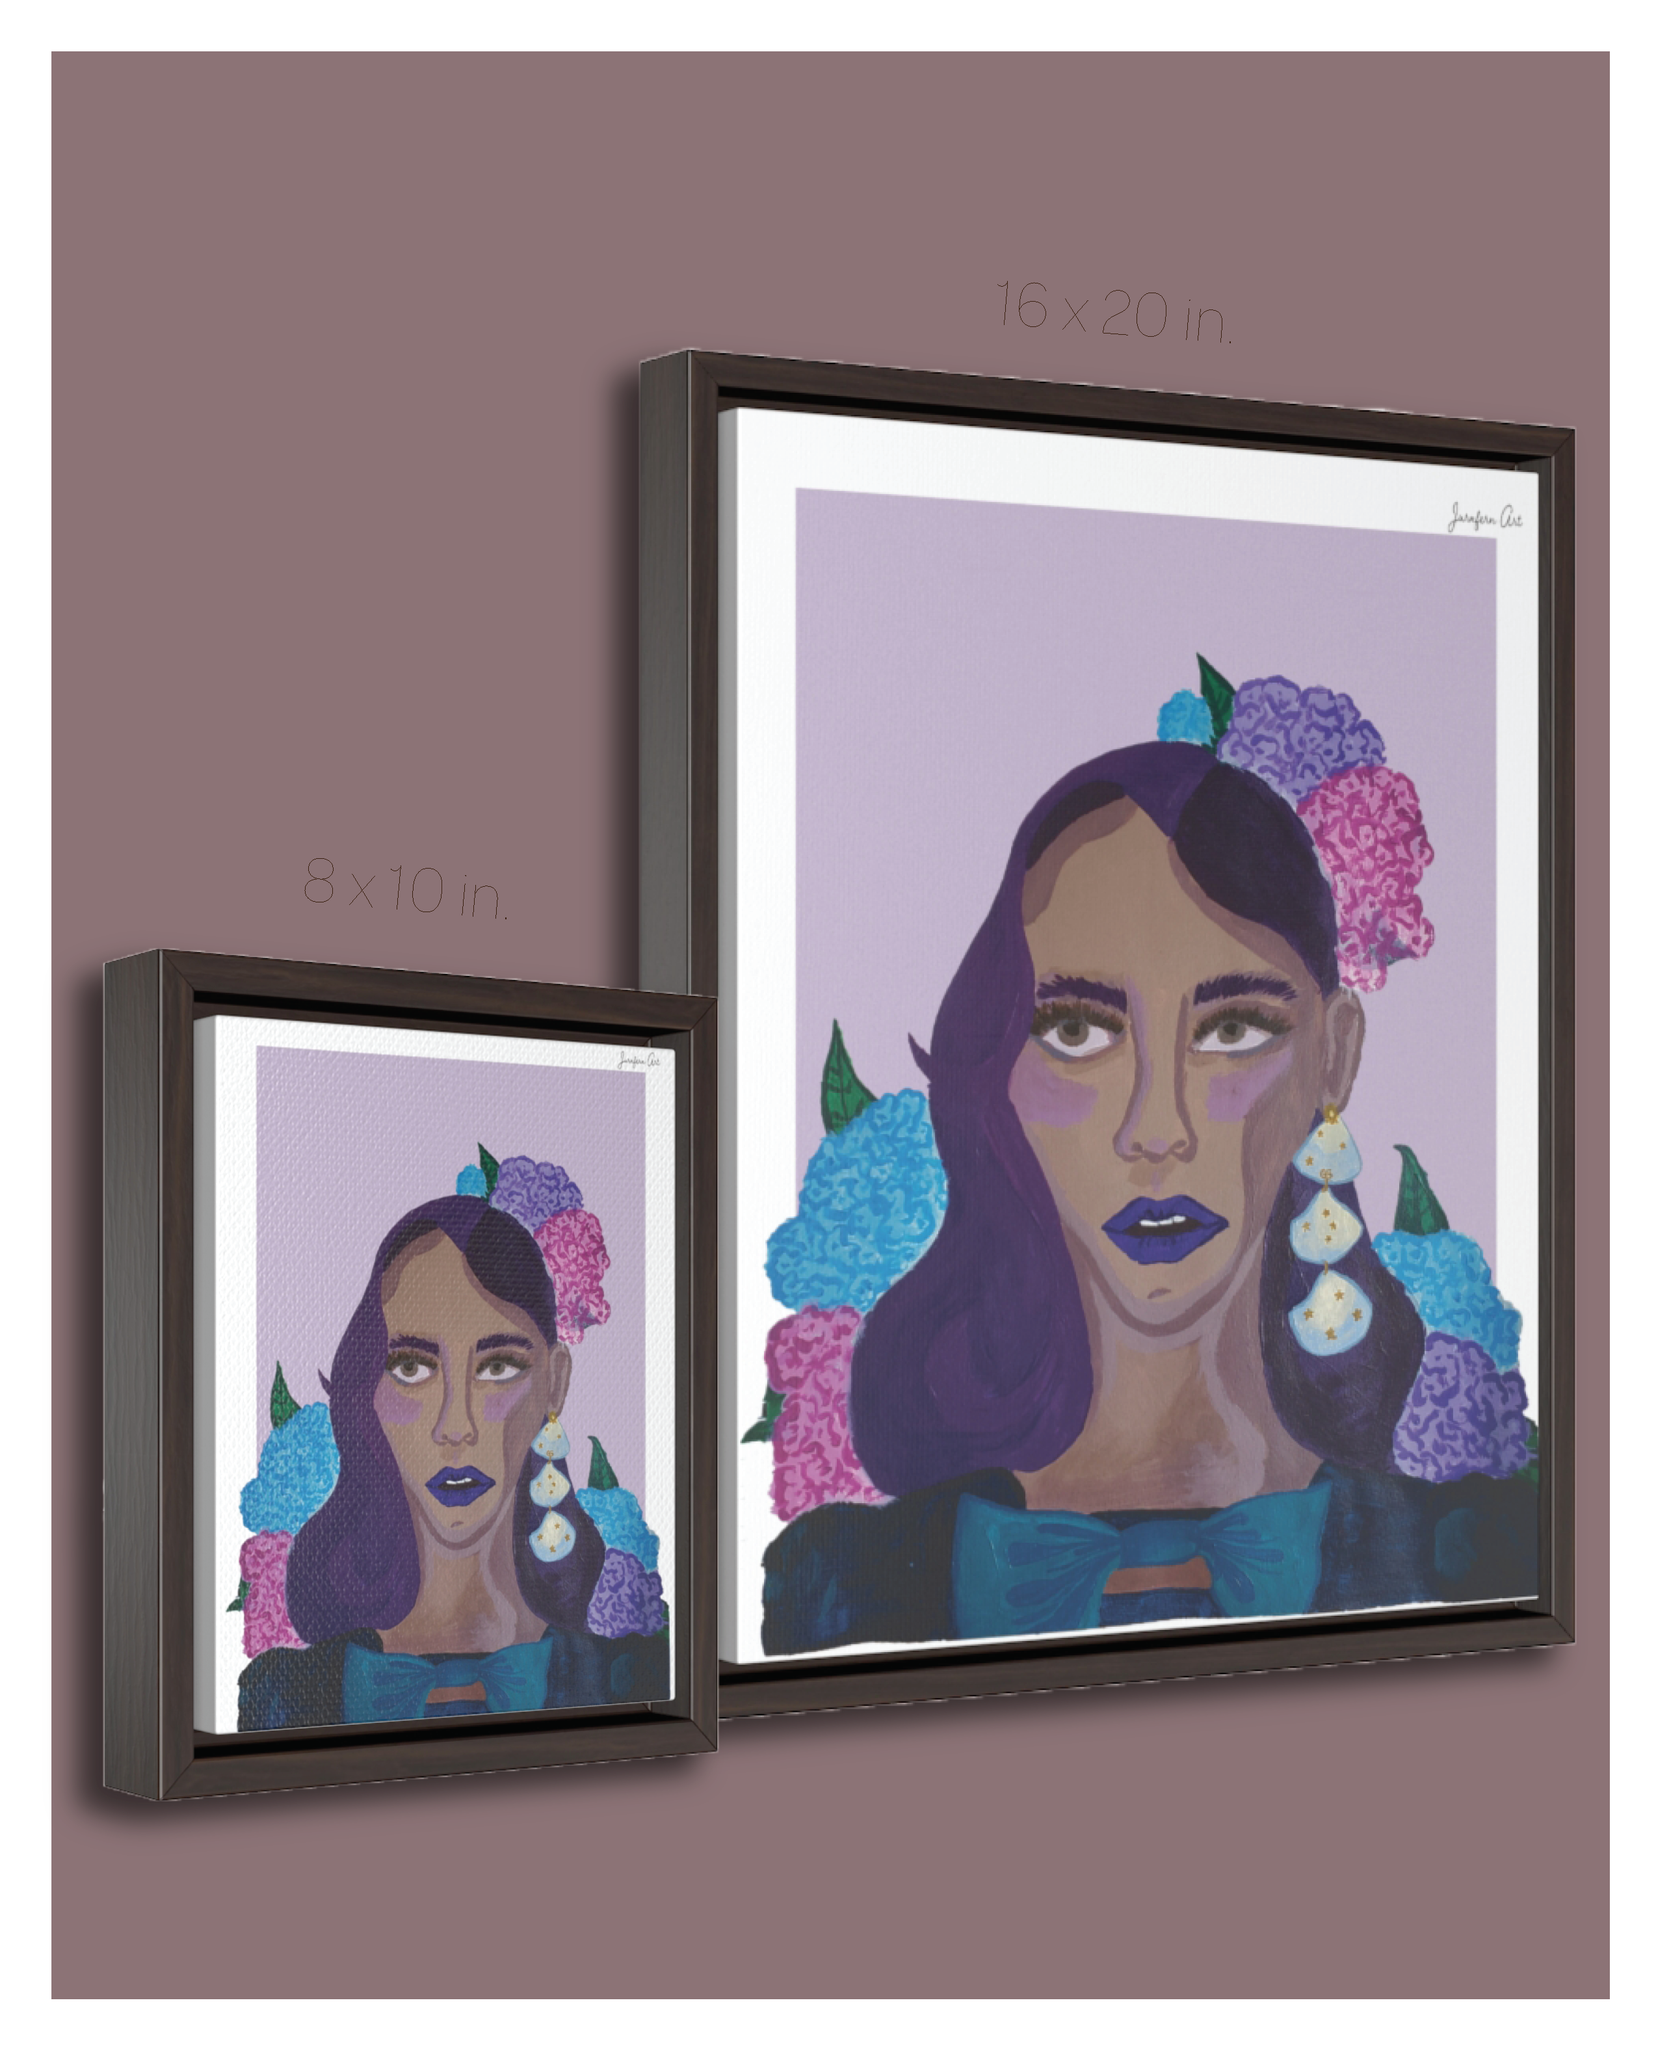 A chart showing two size options for a framed canvas illustration of a Black woman painted in purple hues and wearing a blue dress with a blow in front and hydrangea flowers in her hair